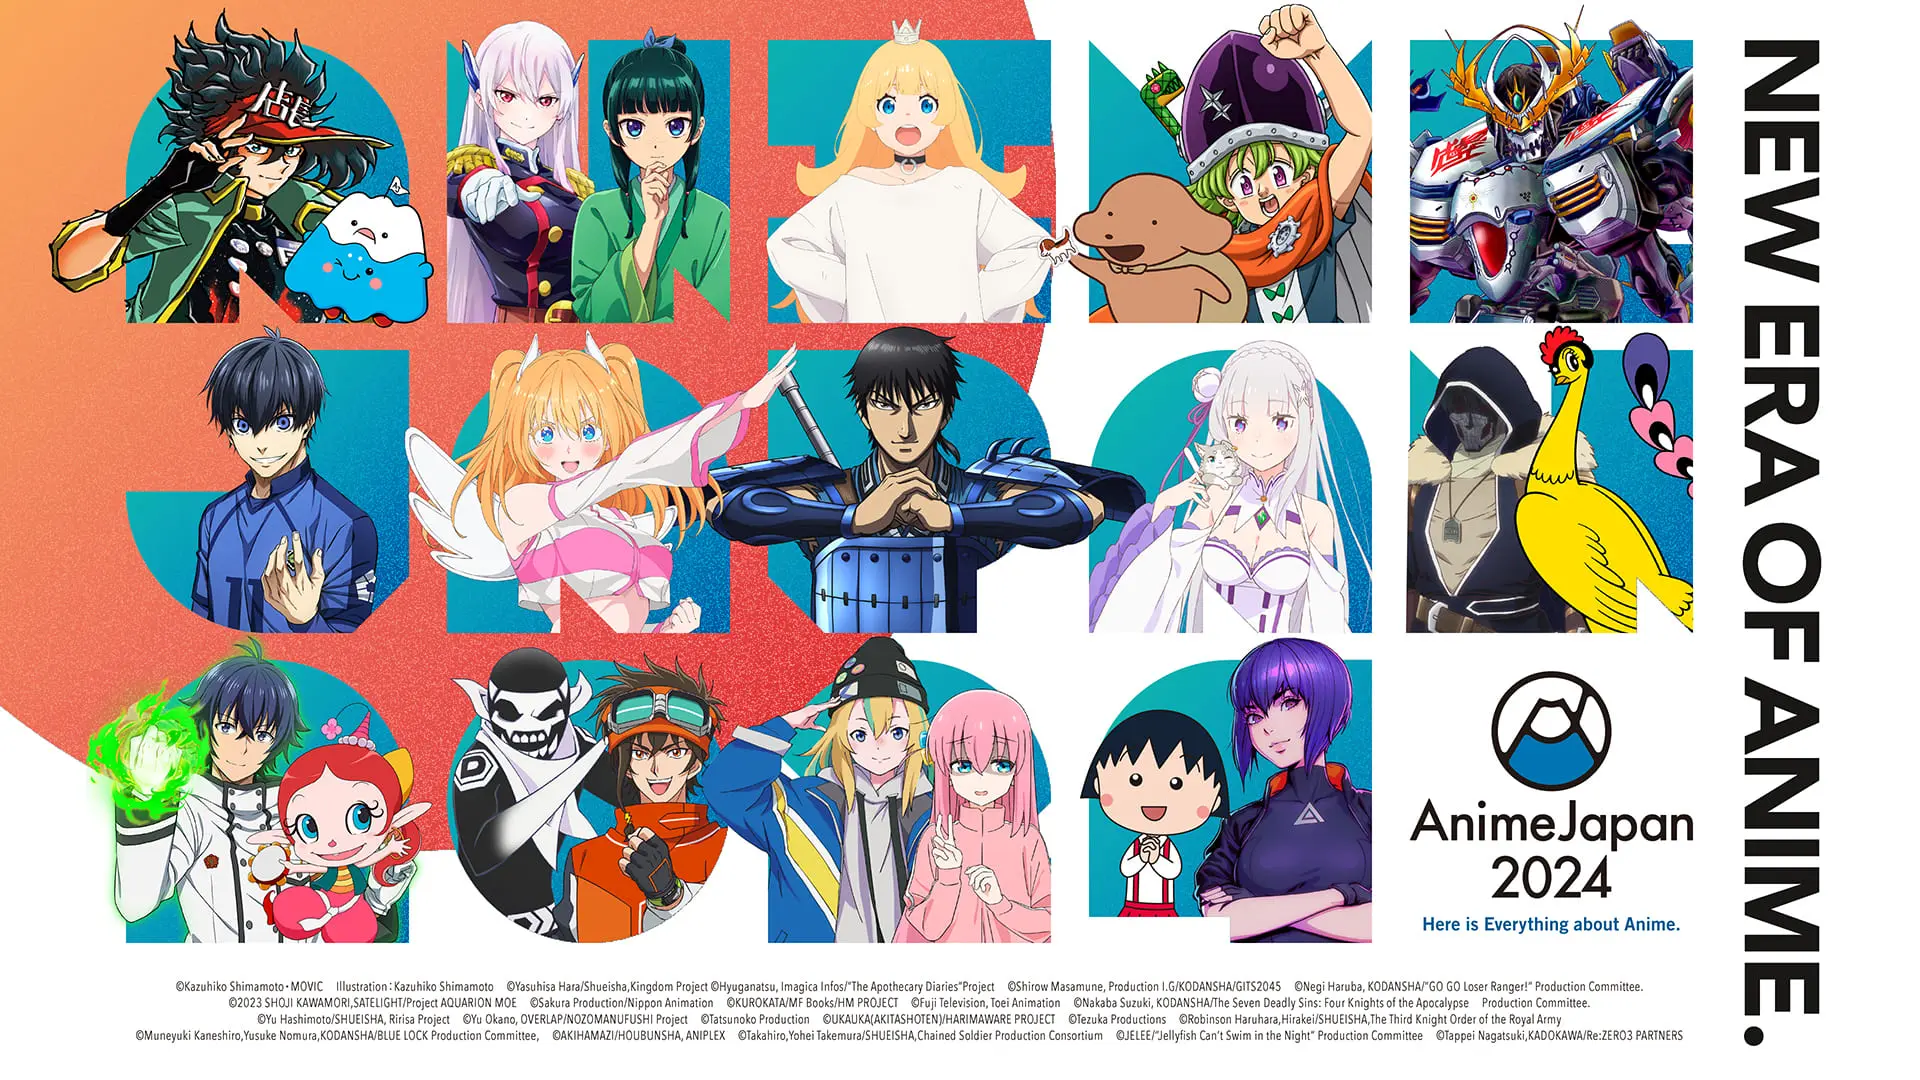 AnimeJapan 2024 Announces Stage Event Schedule